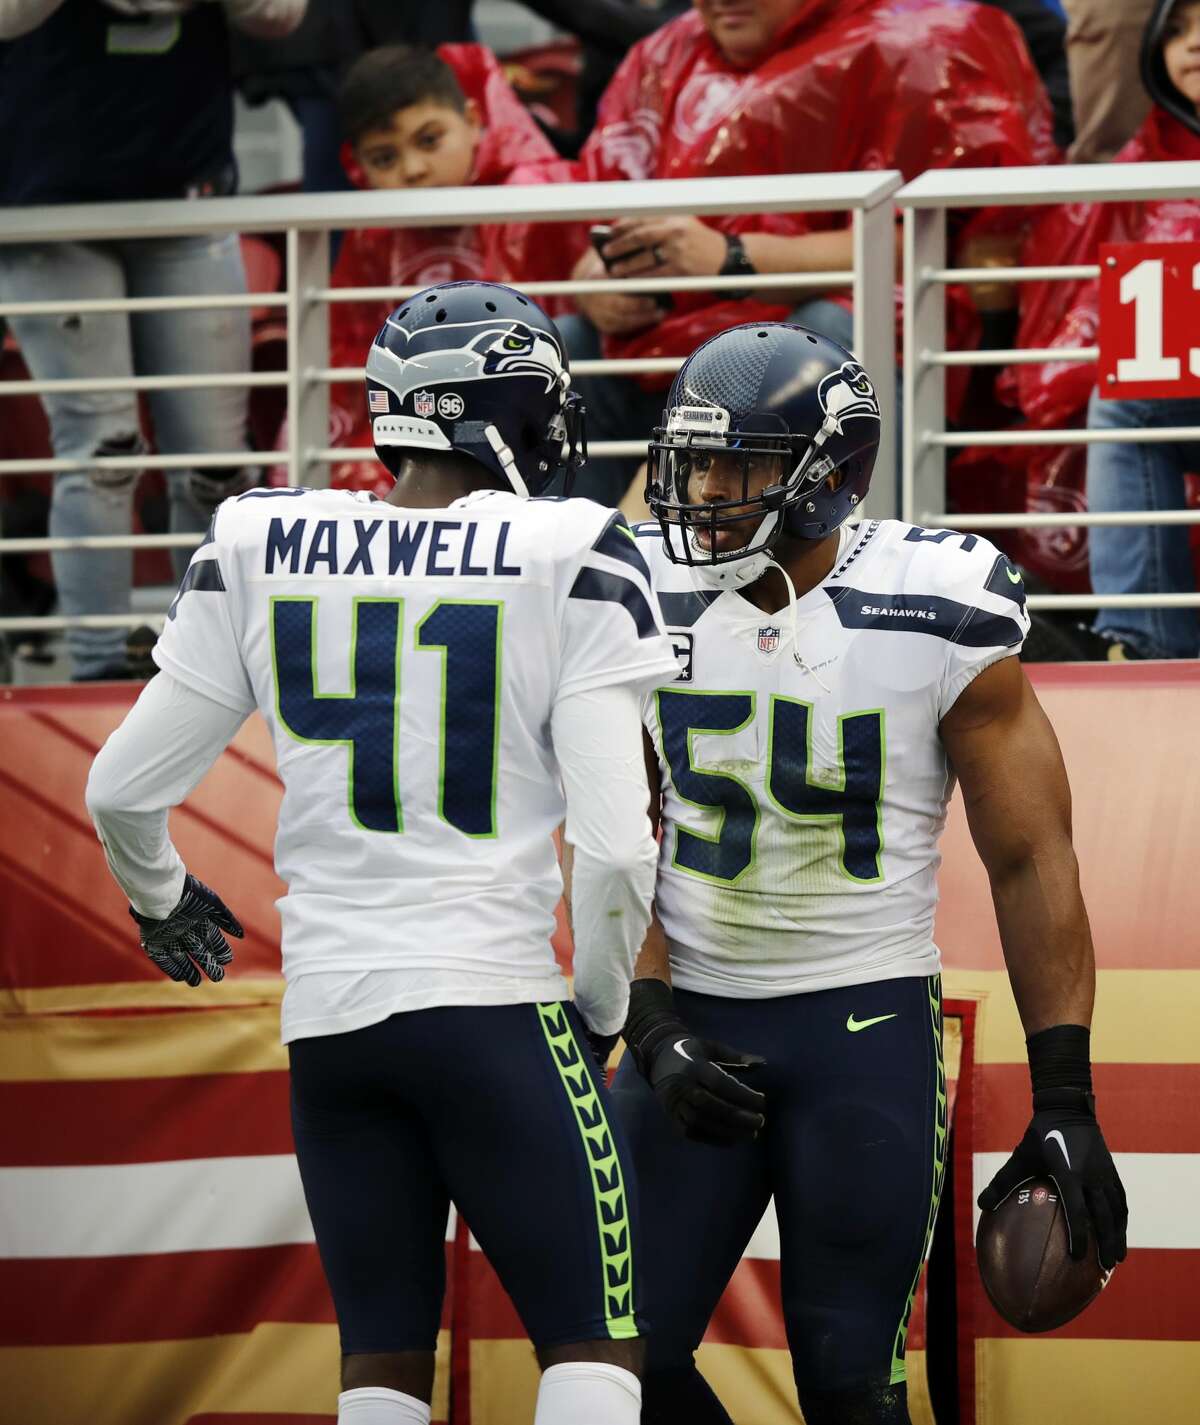 Seattle Seahawks middle linebacker Bobby Wagner (54) celebrates after intercepting a pass with teammate Byron Maxwell (41) during the first half of an NFL football game against the San Francisco 49ers Sunday, Nov. 26, 2017, in Santa Clara, Calif. (AP Photo/John Hefti)